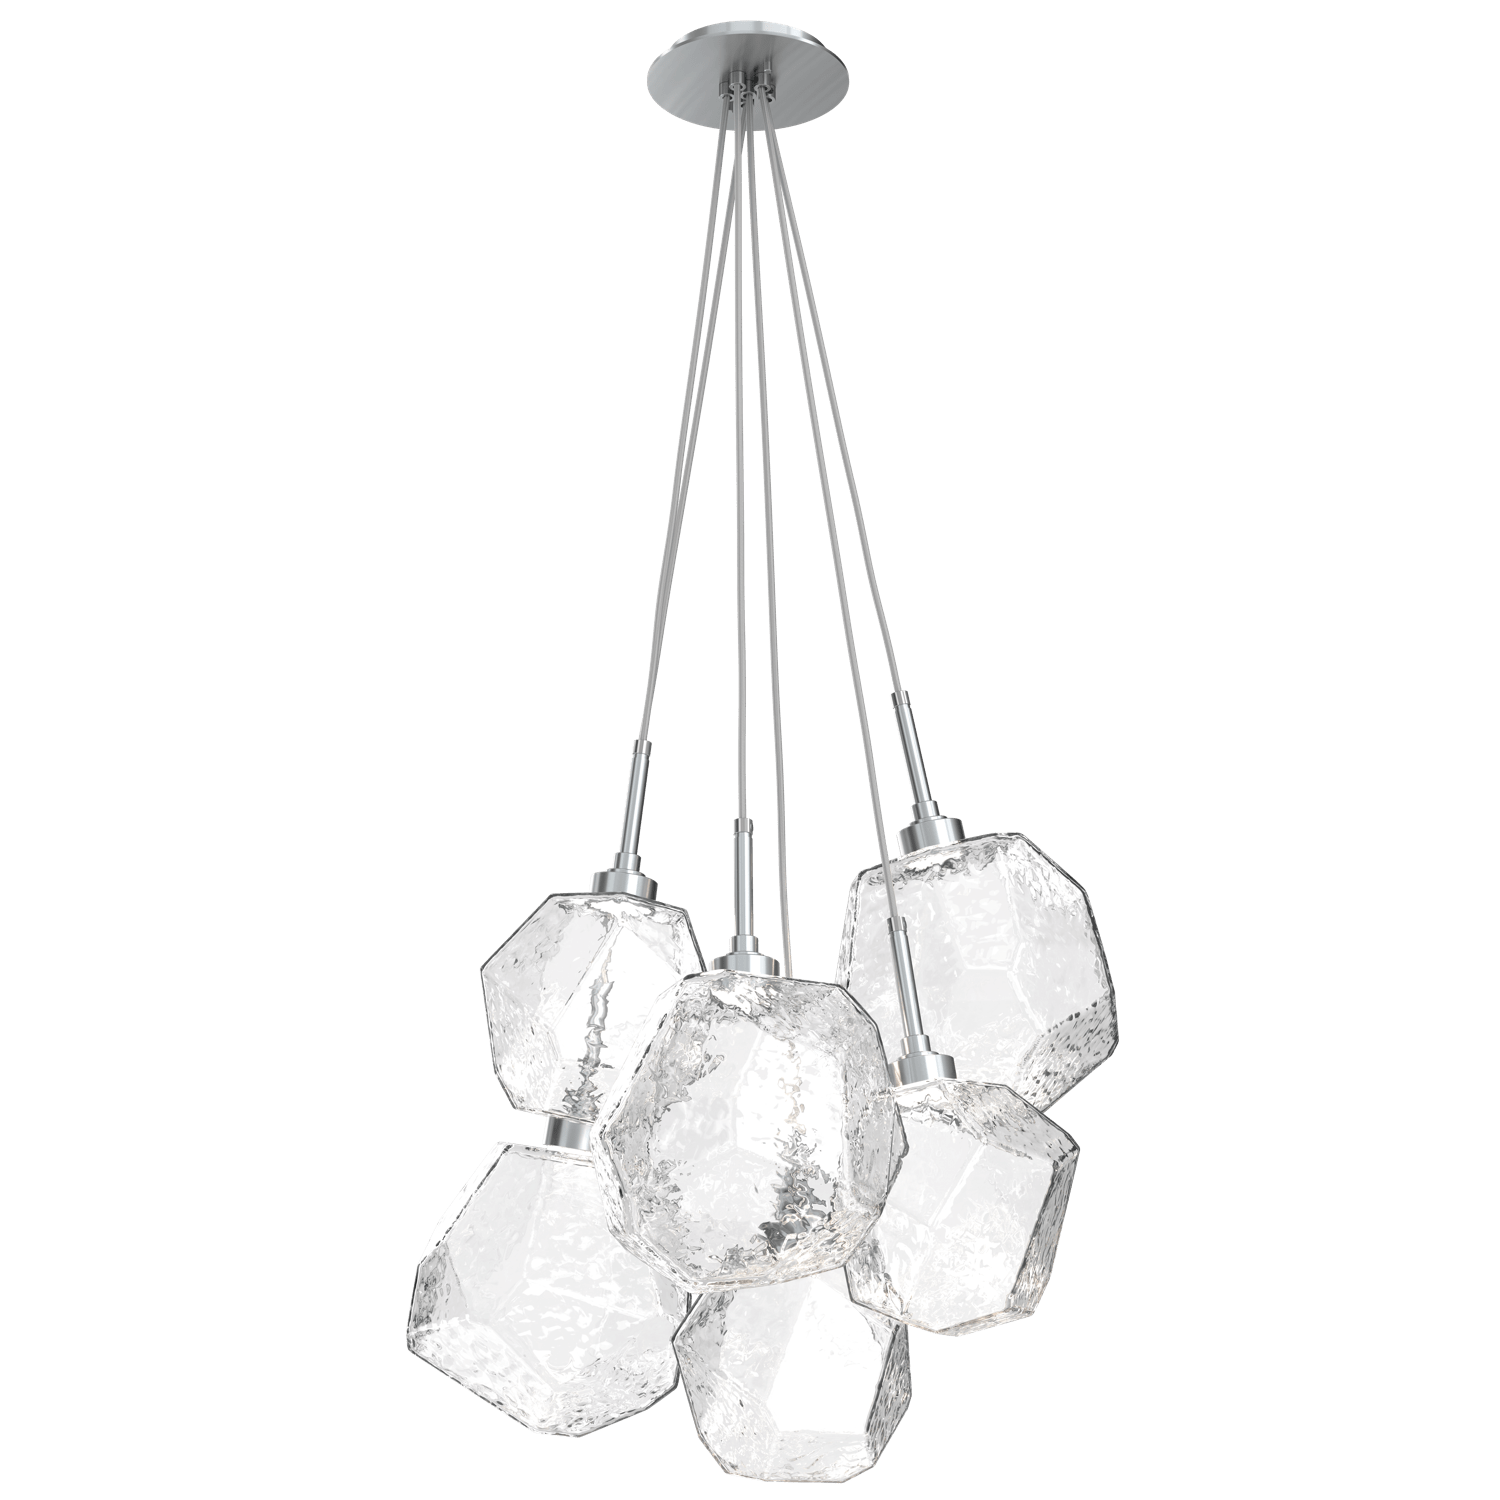 CHB0039-0F-SN-C-Hammerton-Studio-Gem-6-light-cluster-pendant-light-with-satin-nickel-finish-and-clear-blown-glass-shades-and-LED-lamping